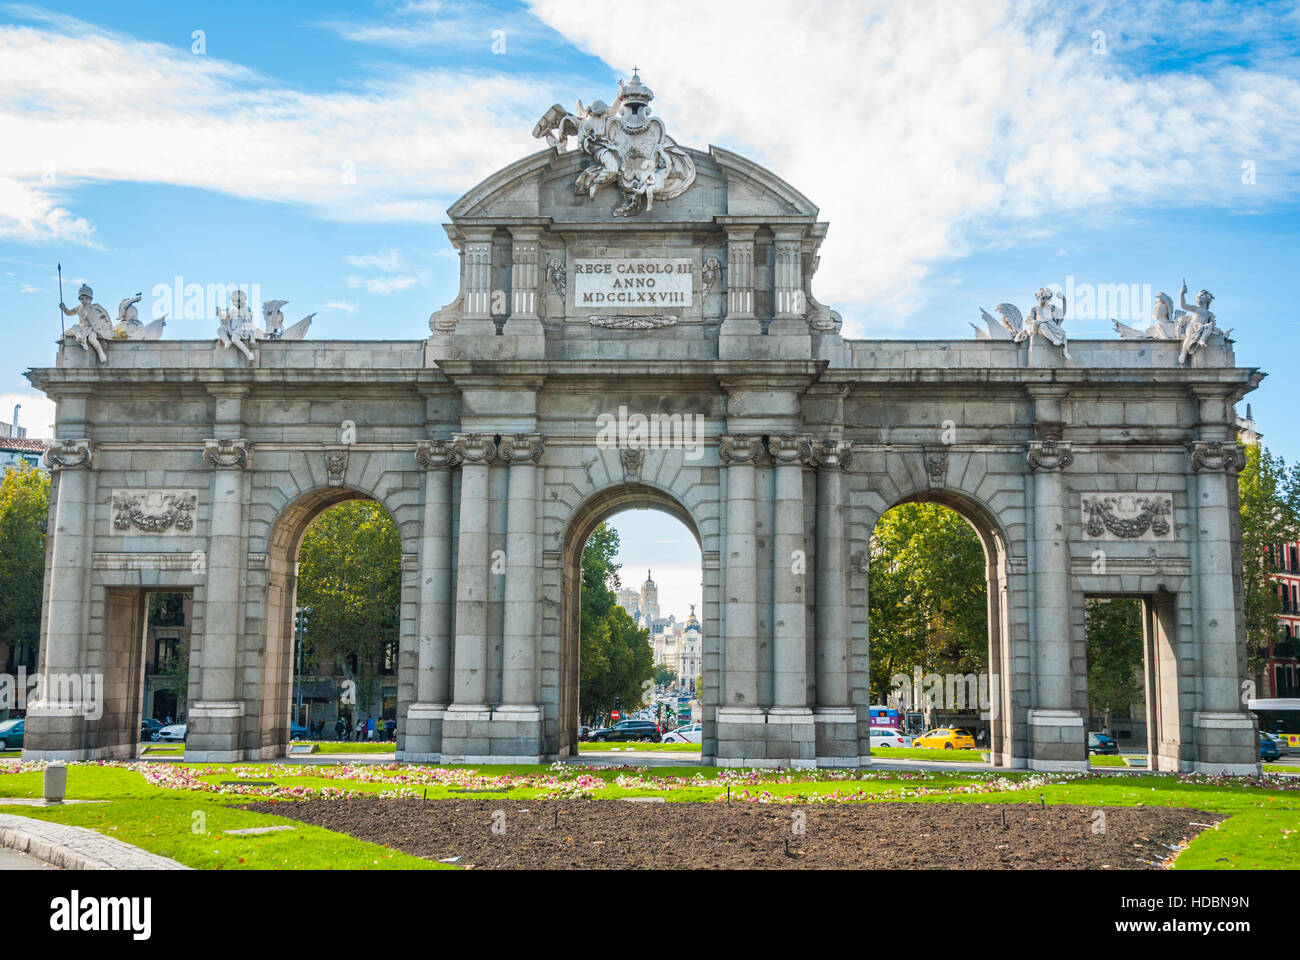 Old Stone gateway once used to welcome nobles and Royals to the city of Madrid. Stock Photo